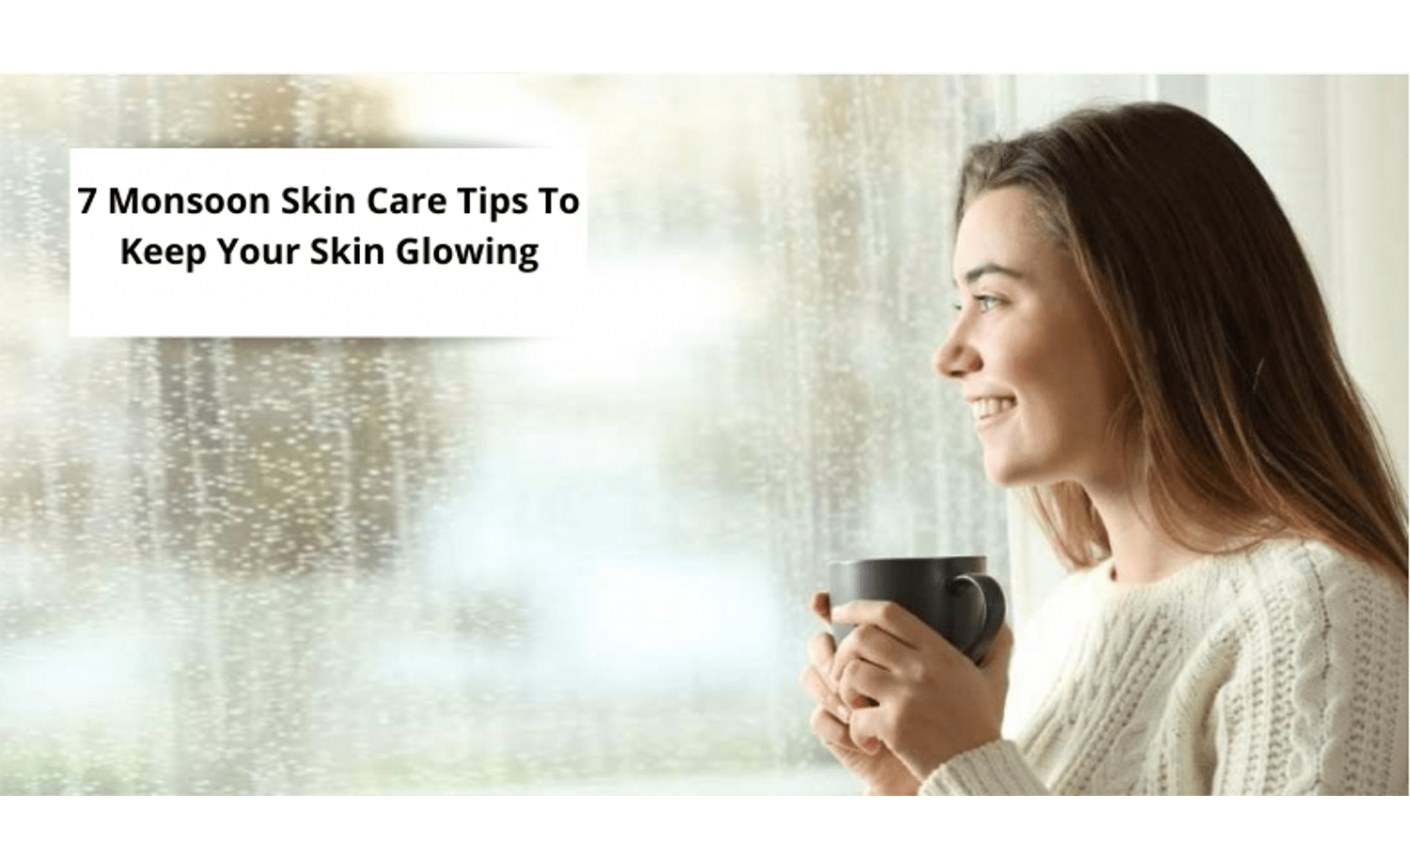 7 Monsoon Skin Care Tips To Keep Your Skin Glowing